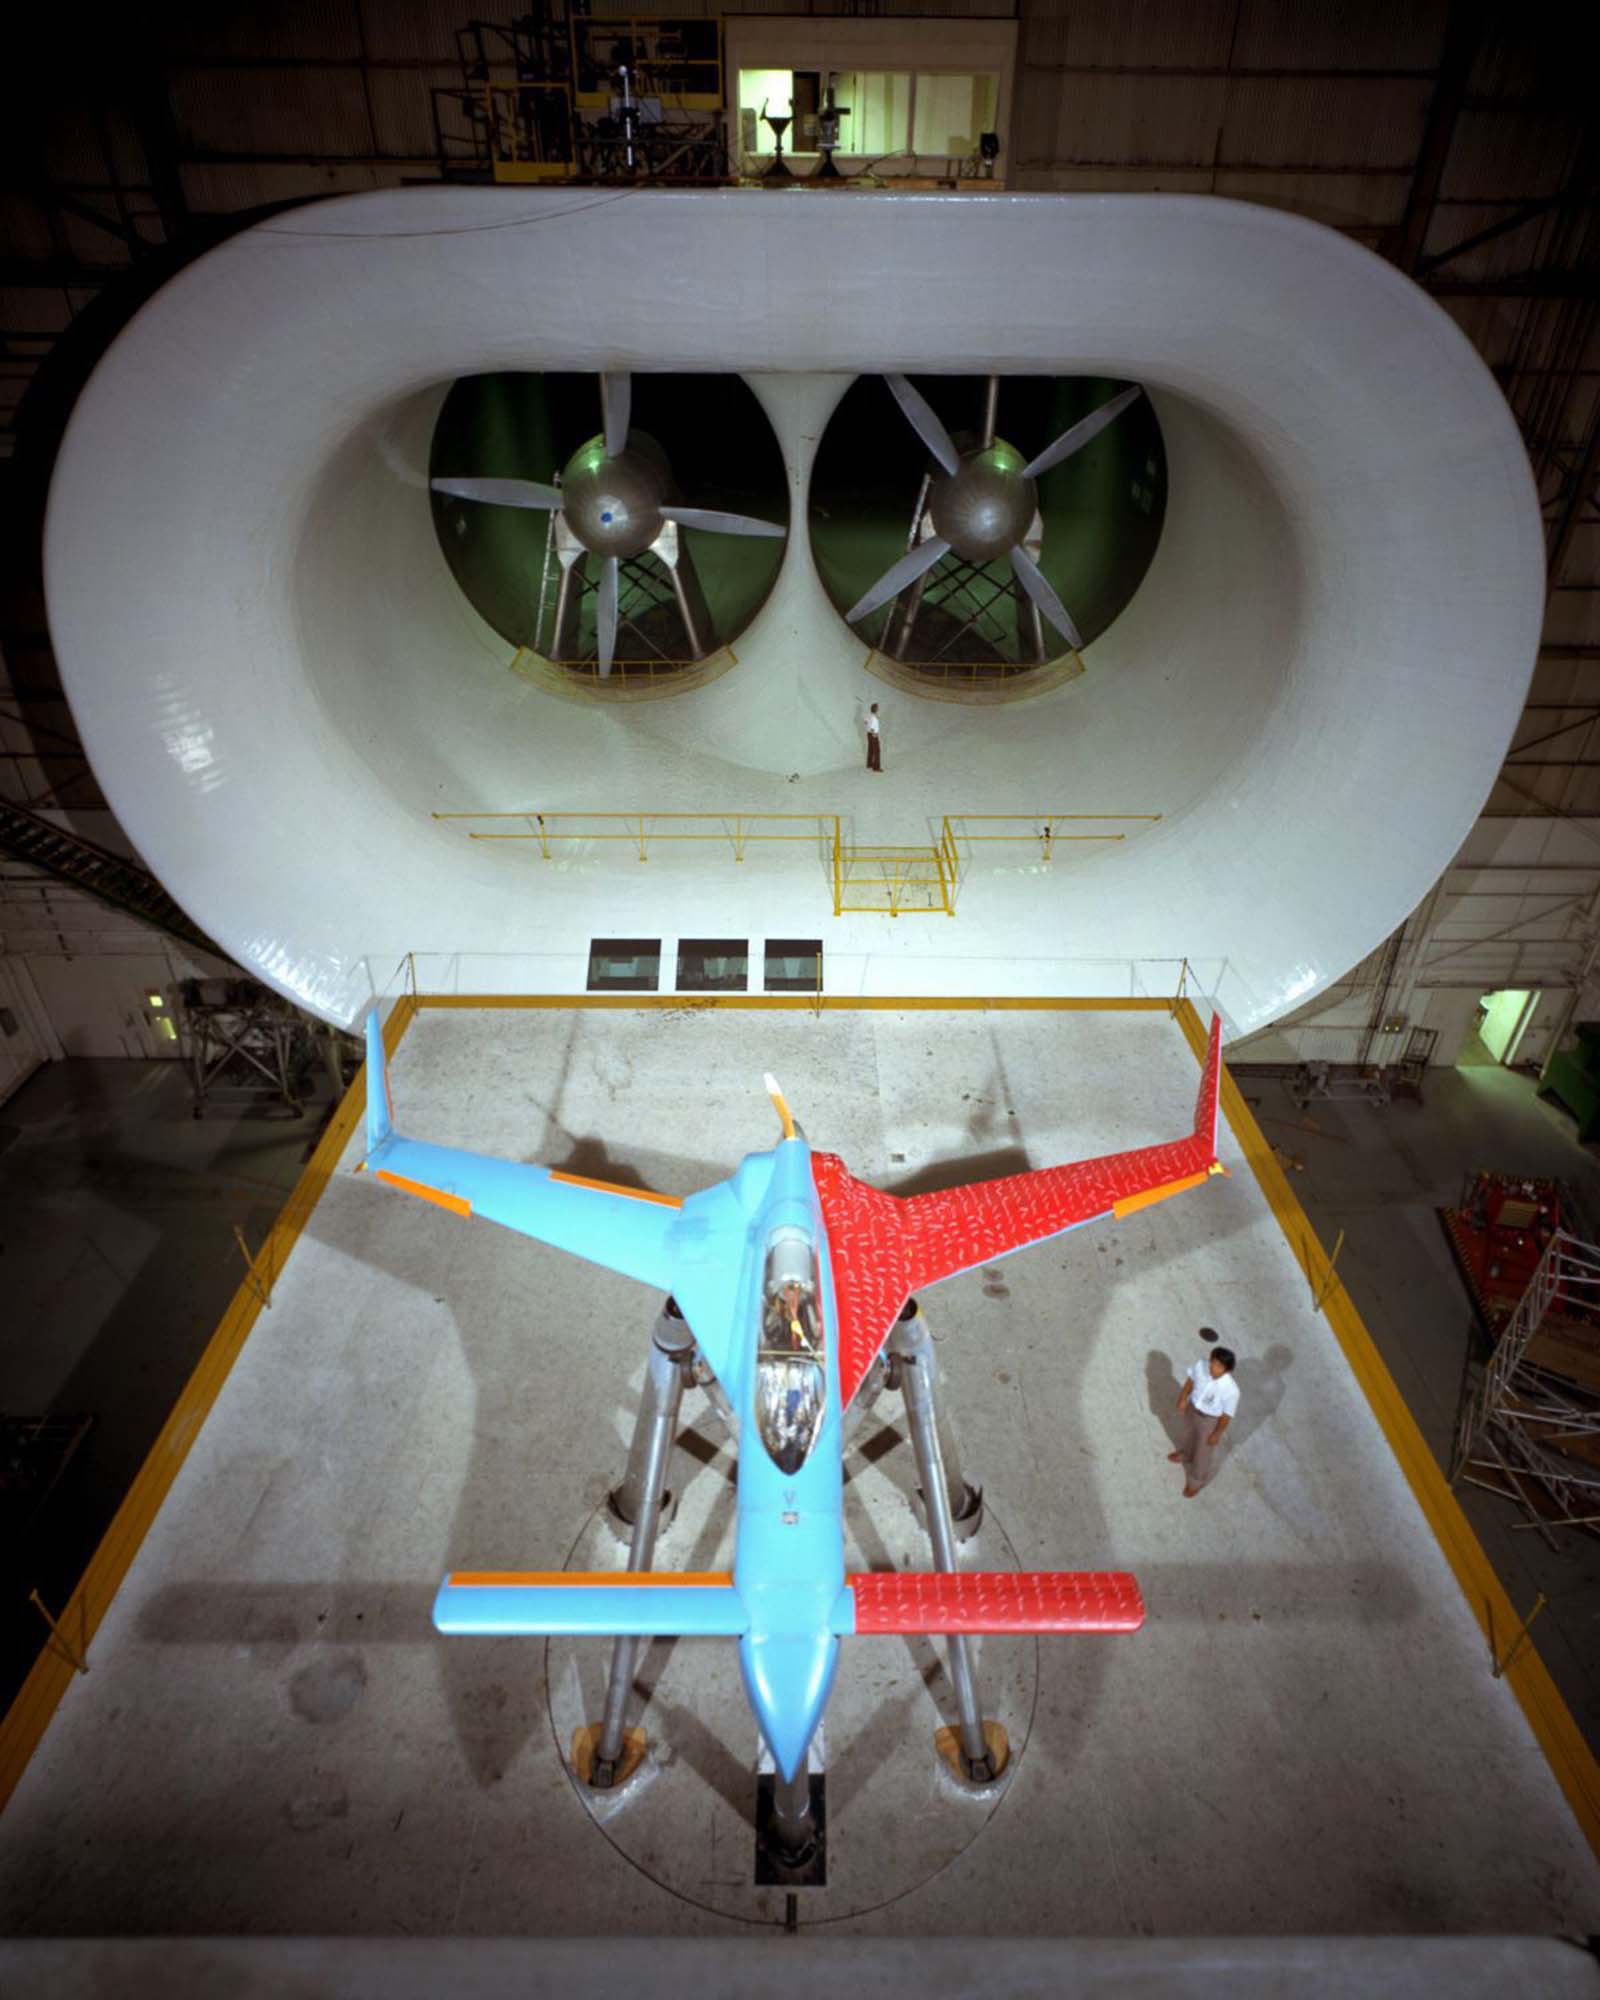 The Rutan Model 33 VariEze was built by the Model and Composites Section of Langley Research Center and then tested in the 30 x 60 Full Scale Tunnel.